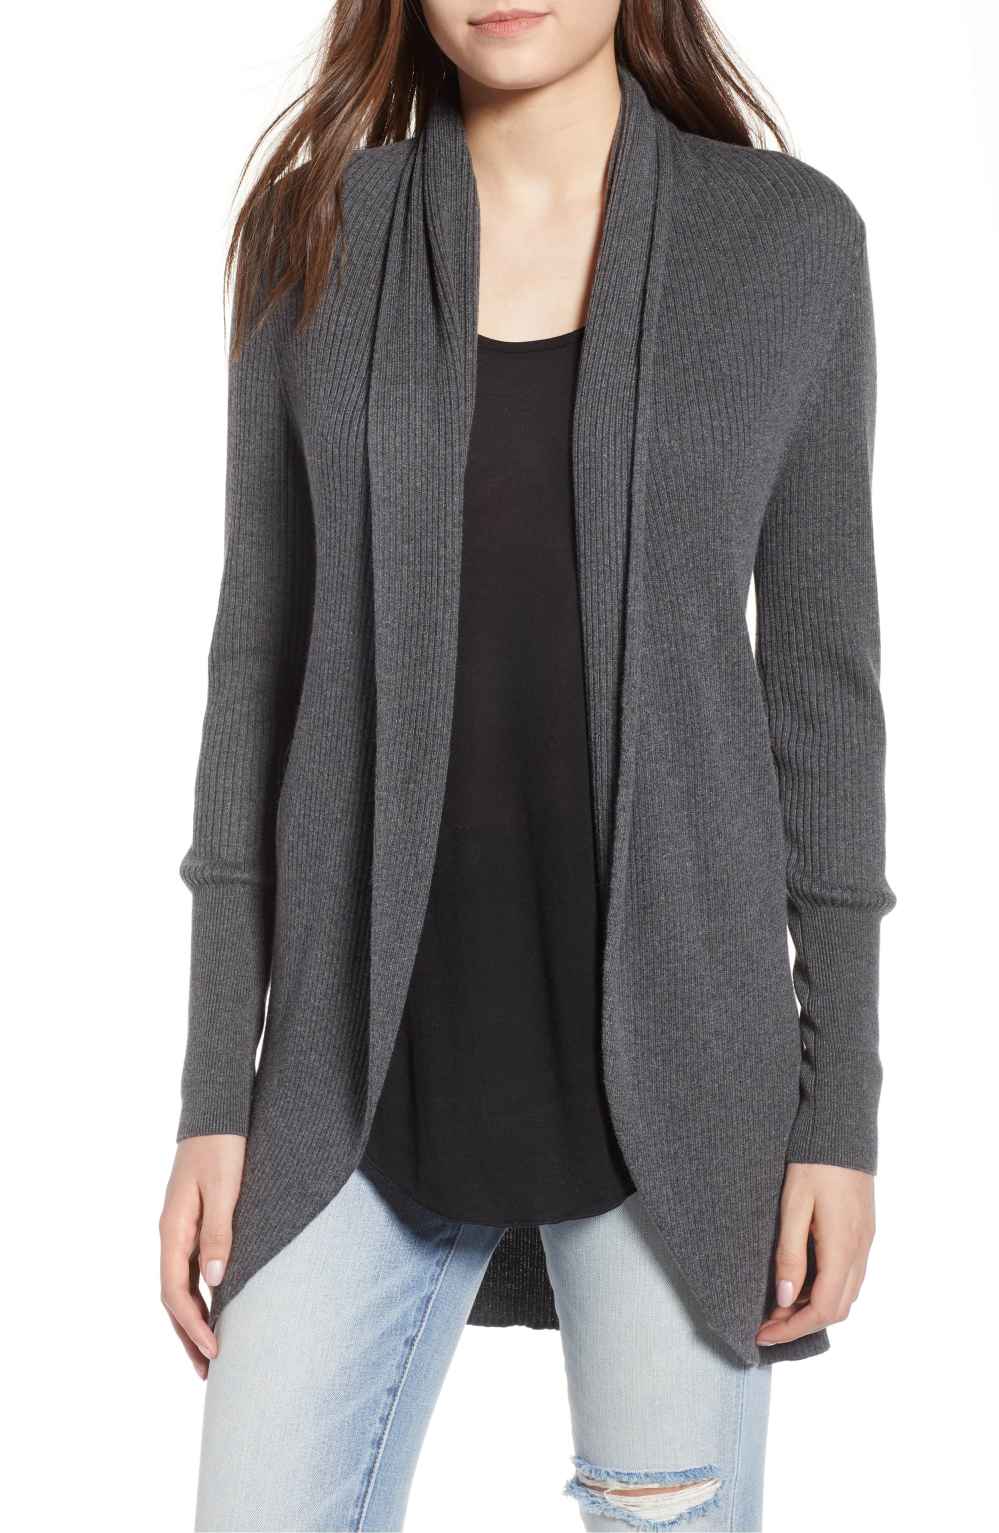 leith shawl cocoon sweater gray nordstrom